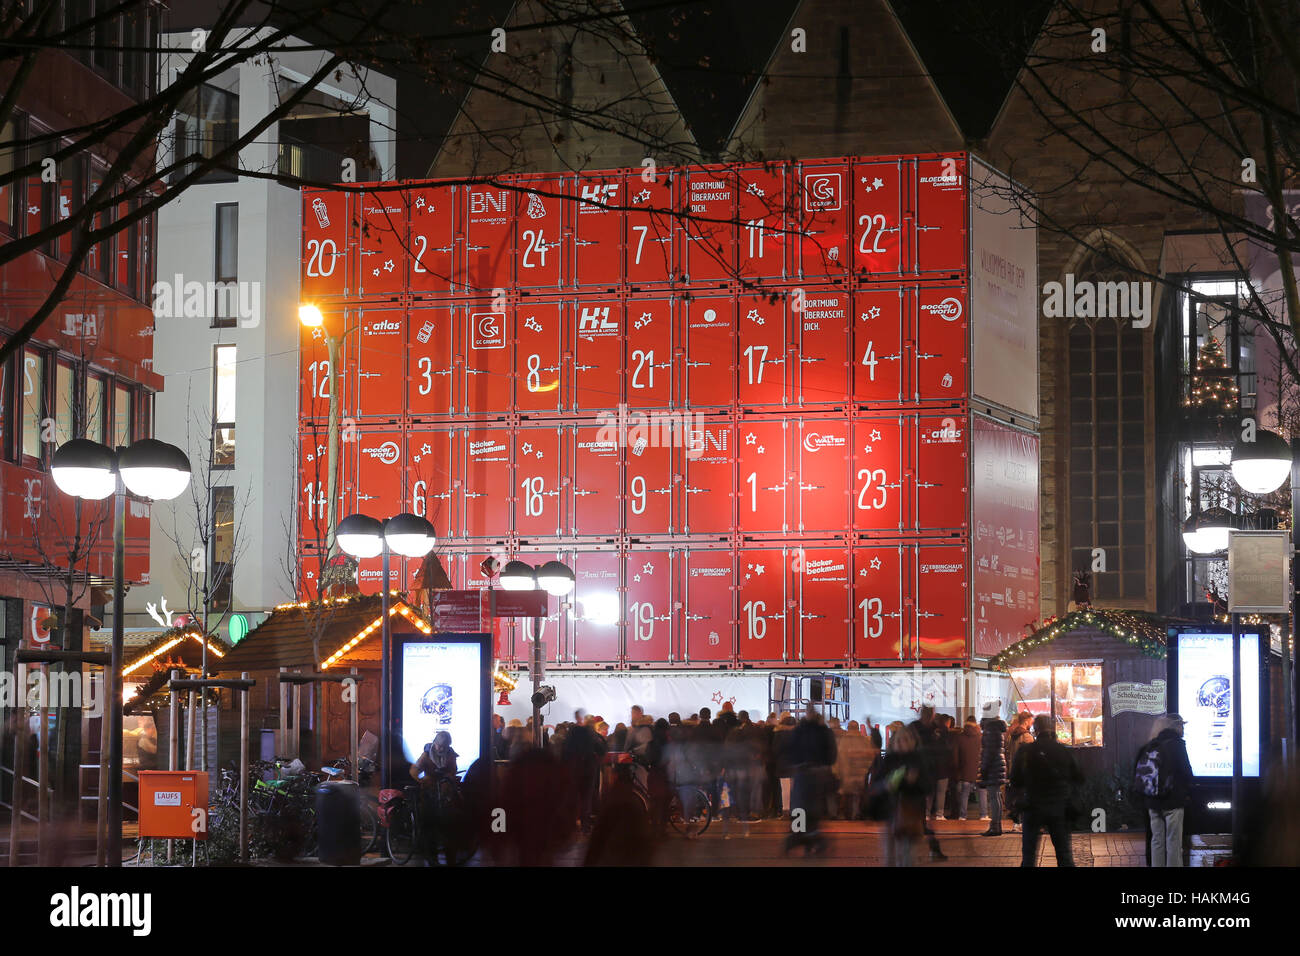 Dortmund/Germany, Dec.1th 2016. The first door has been  opened at the supposedly largest Advent calendar of the world. Made of 30 ship containers the Advent calendar is 15 x 13 meters in size and has a total weight of 64 tonnes. Behind the first door was a voucher for the furnishing of a children's home in Dortmund. From December 1th onwards, a Christmas child will open a door every day at 18:00 from above a lifter. Stock Photo